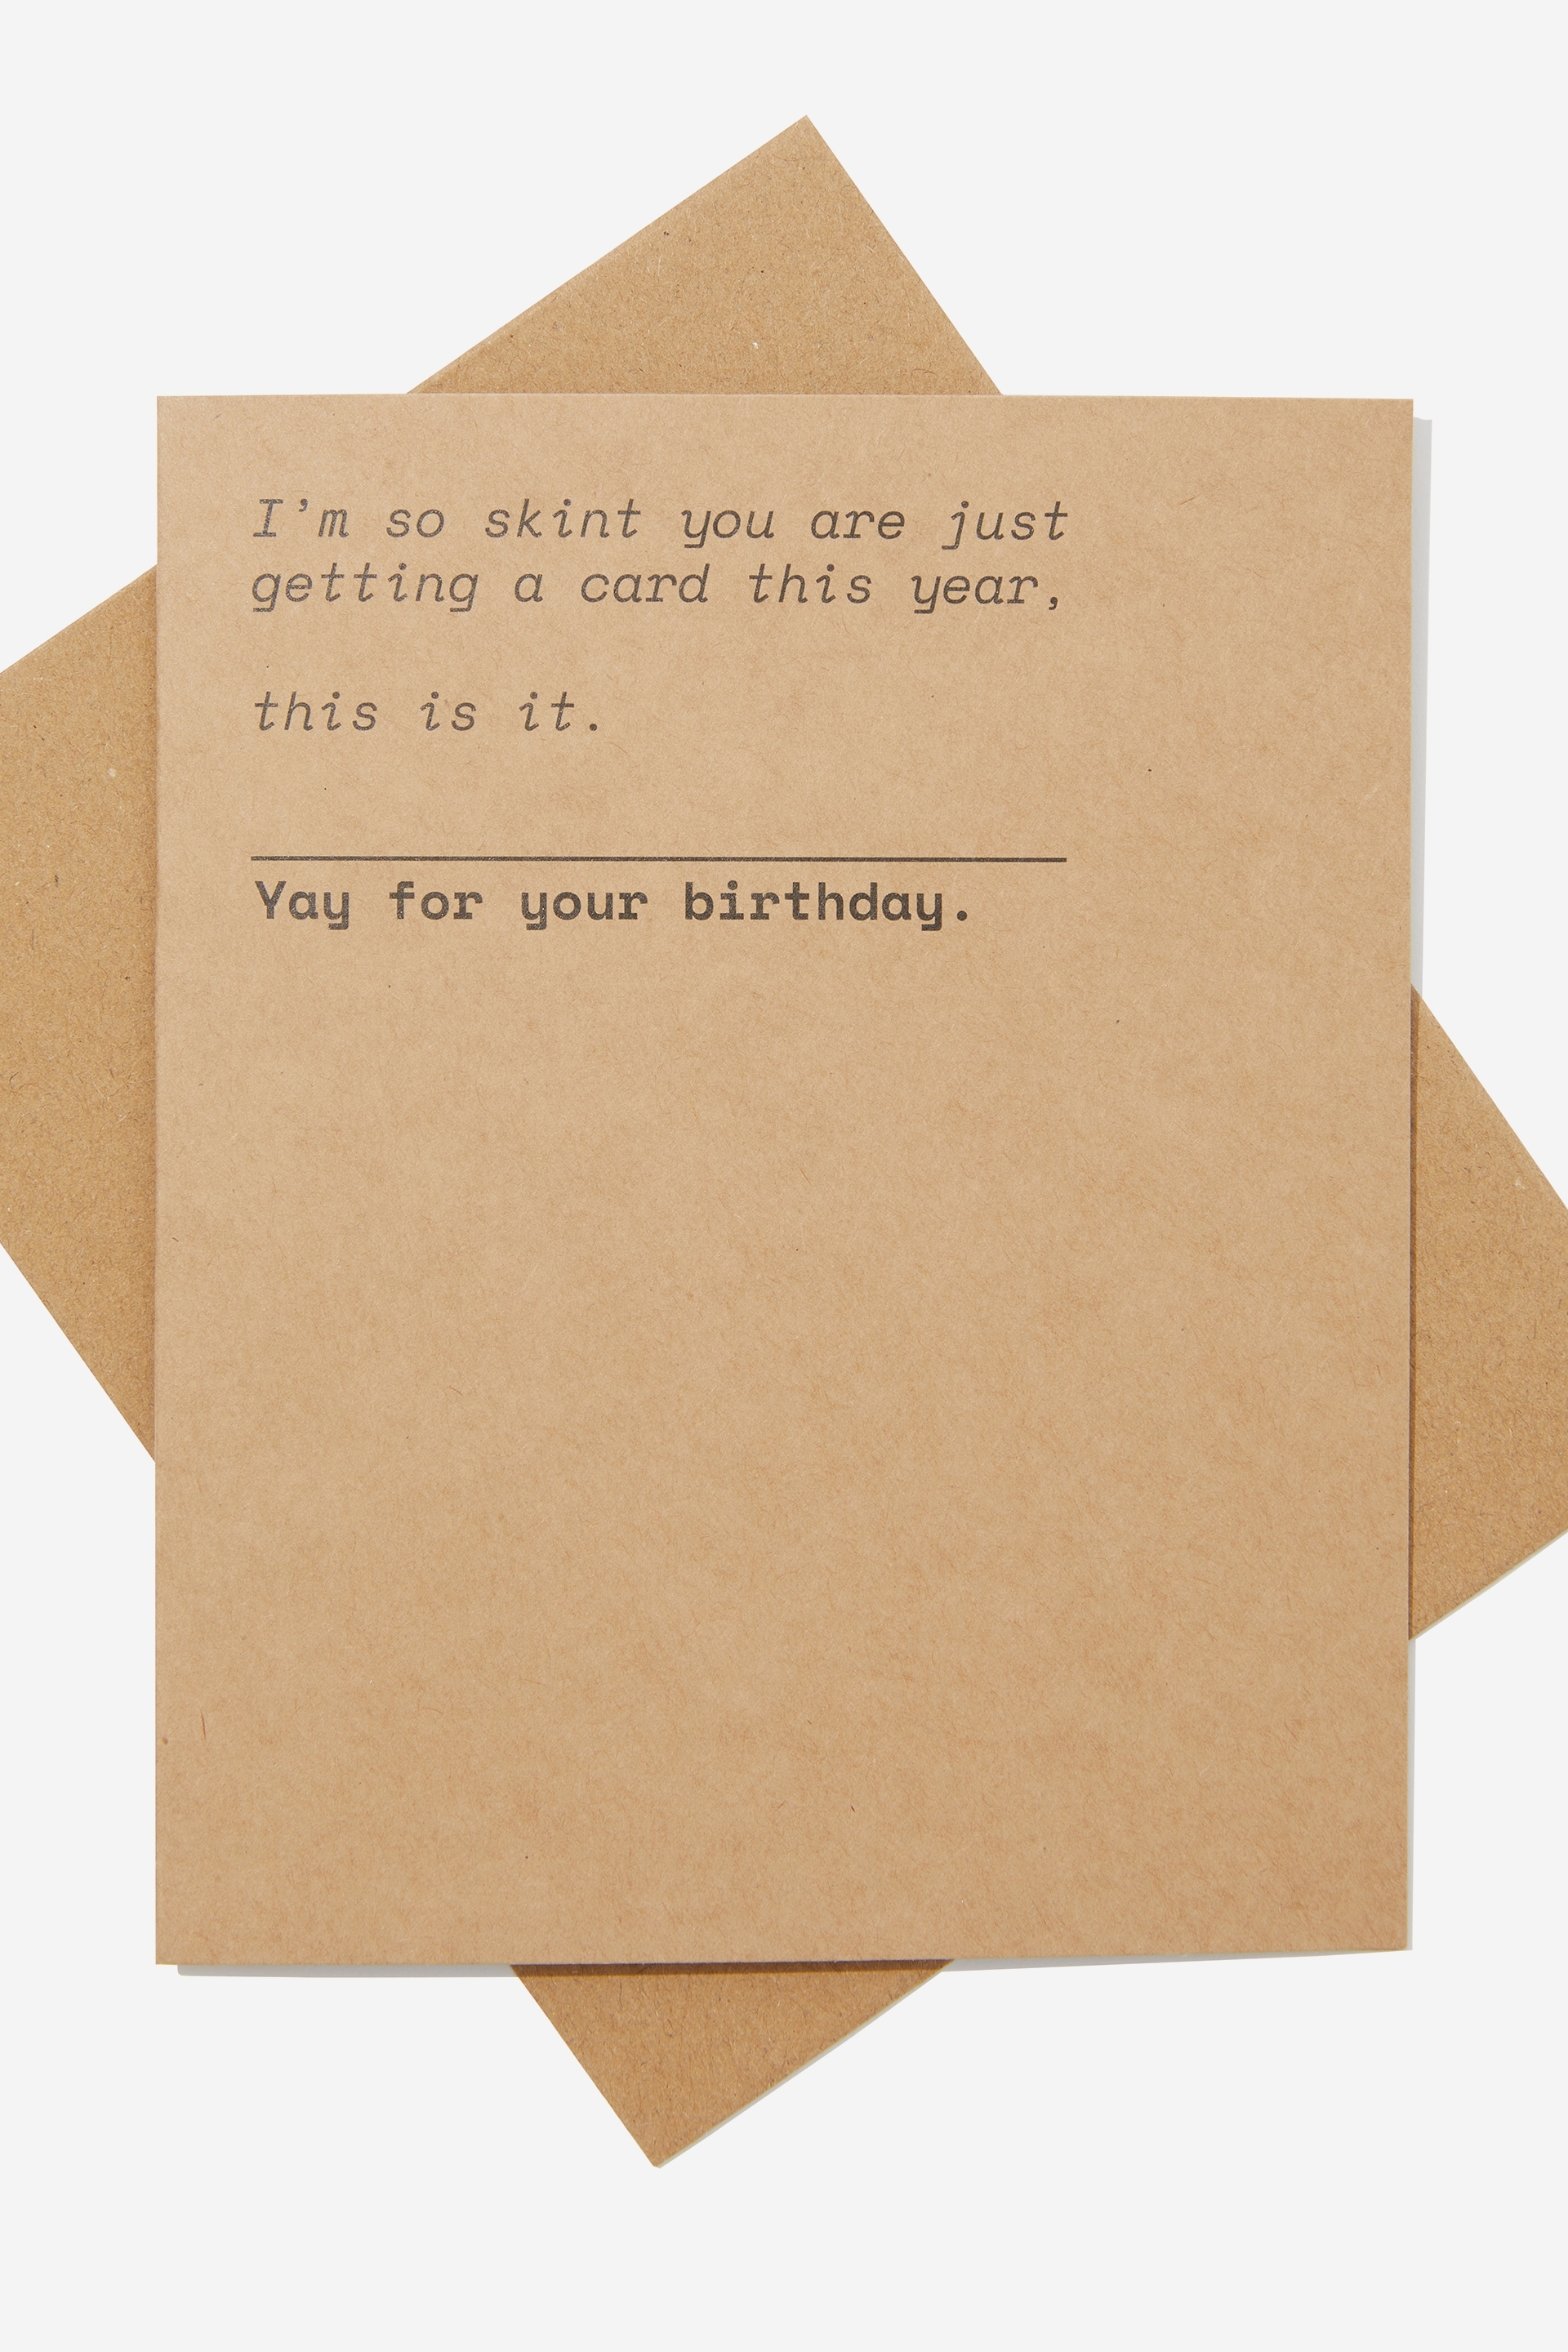 Typo - Nice Birthday Card - Rg uk i m so skint you re just getting a card